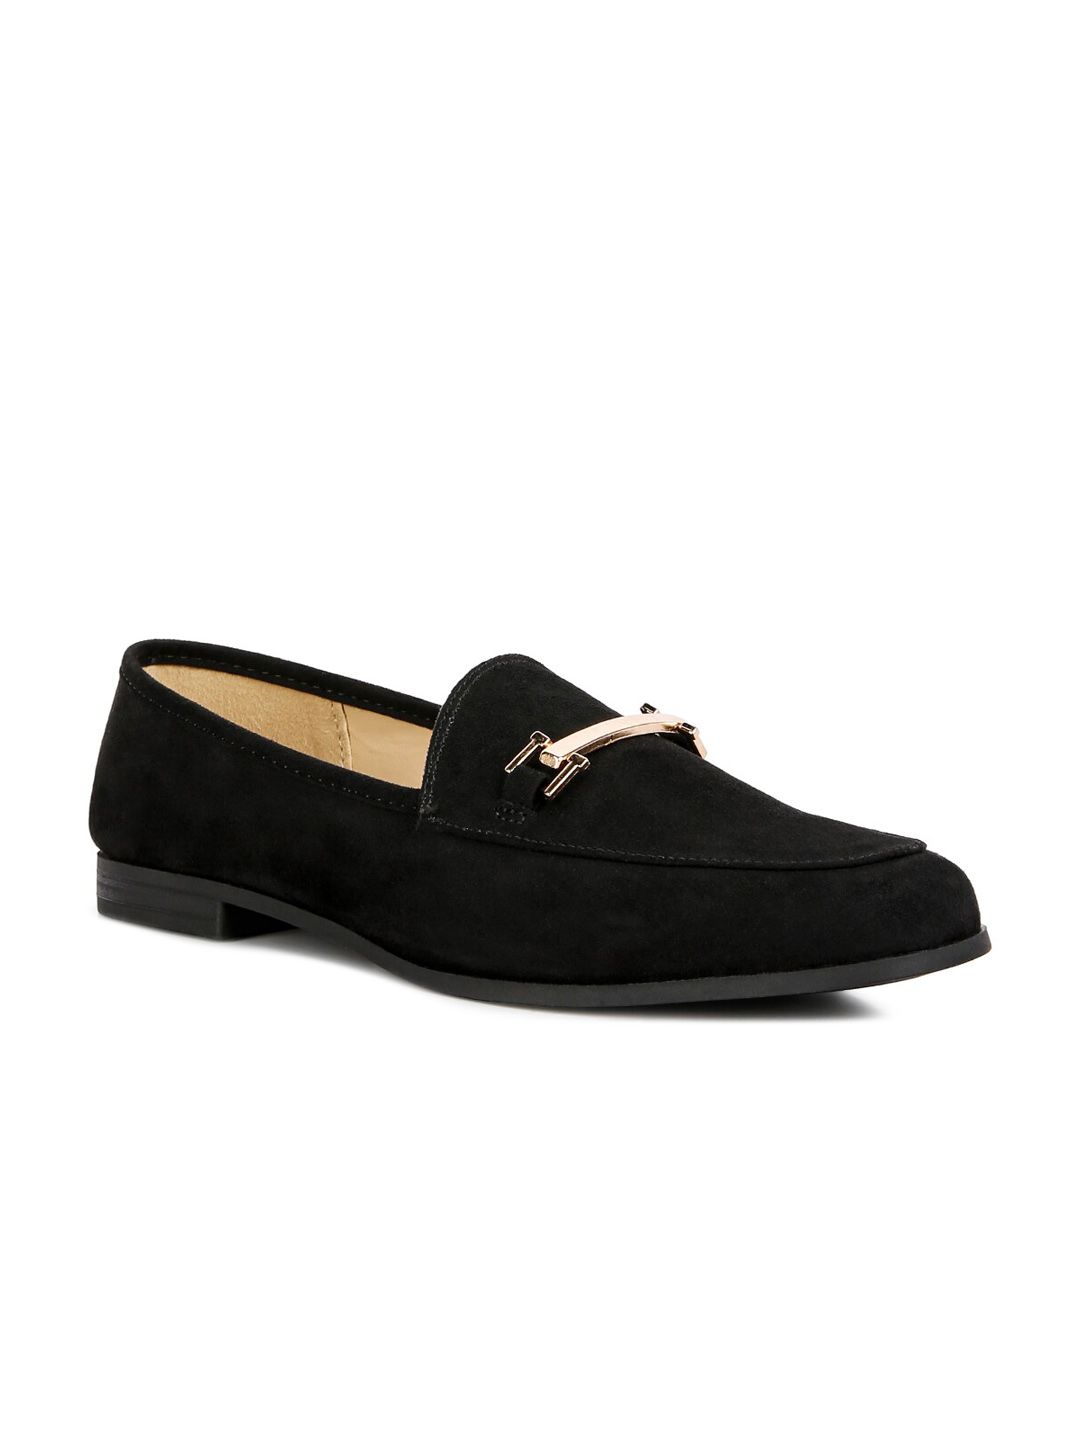 London Rag Women Black Suede Loafers Price in India